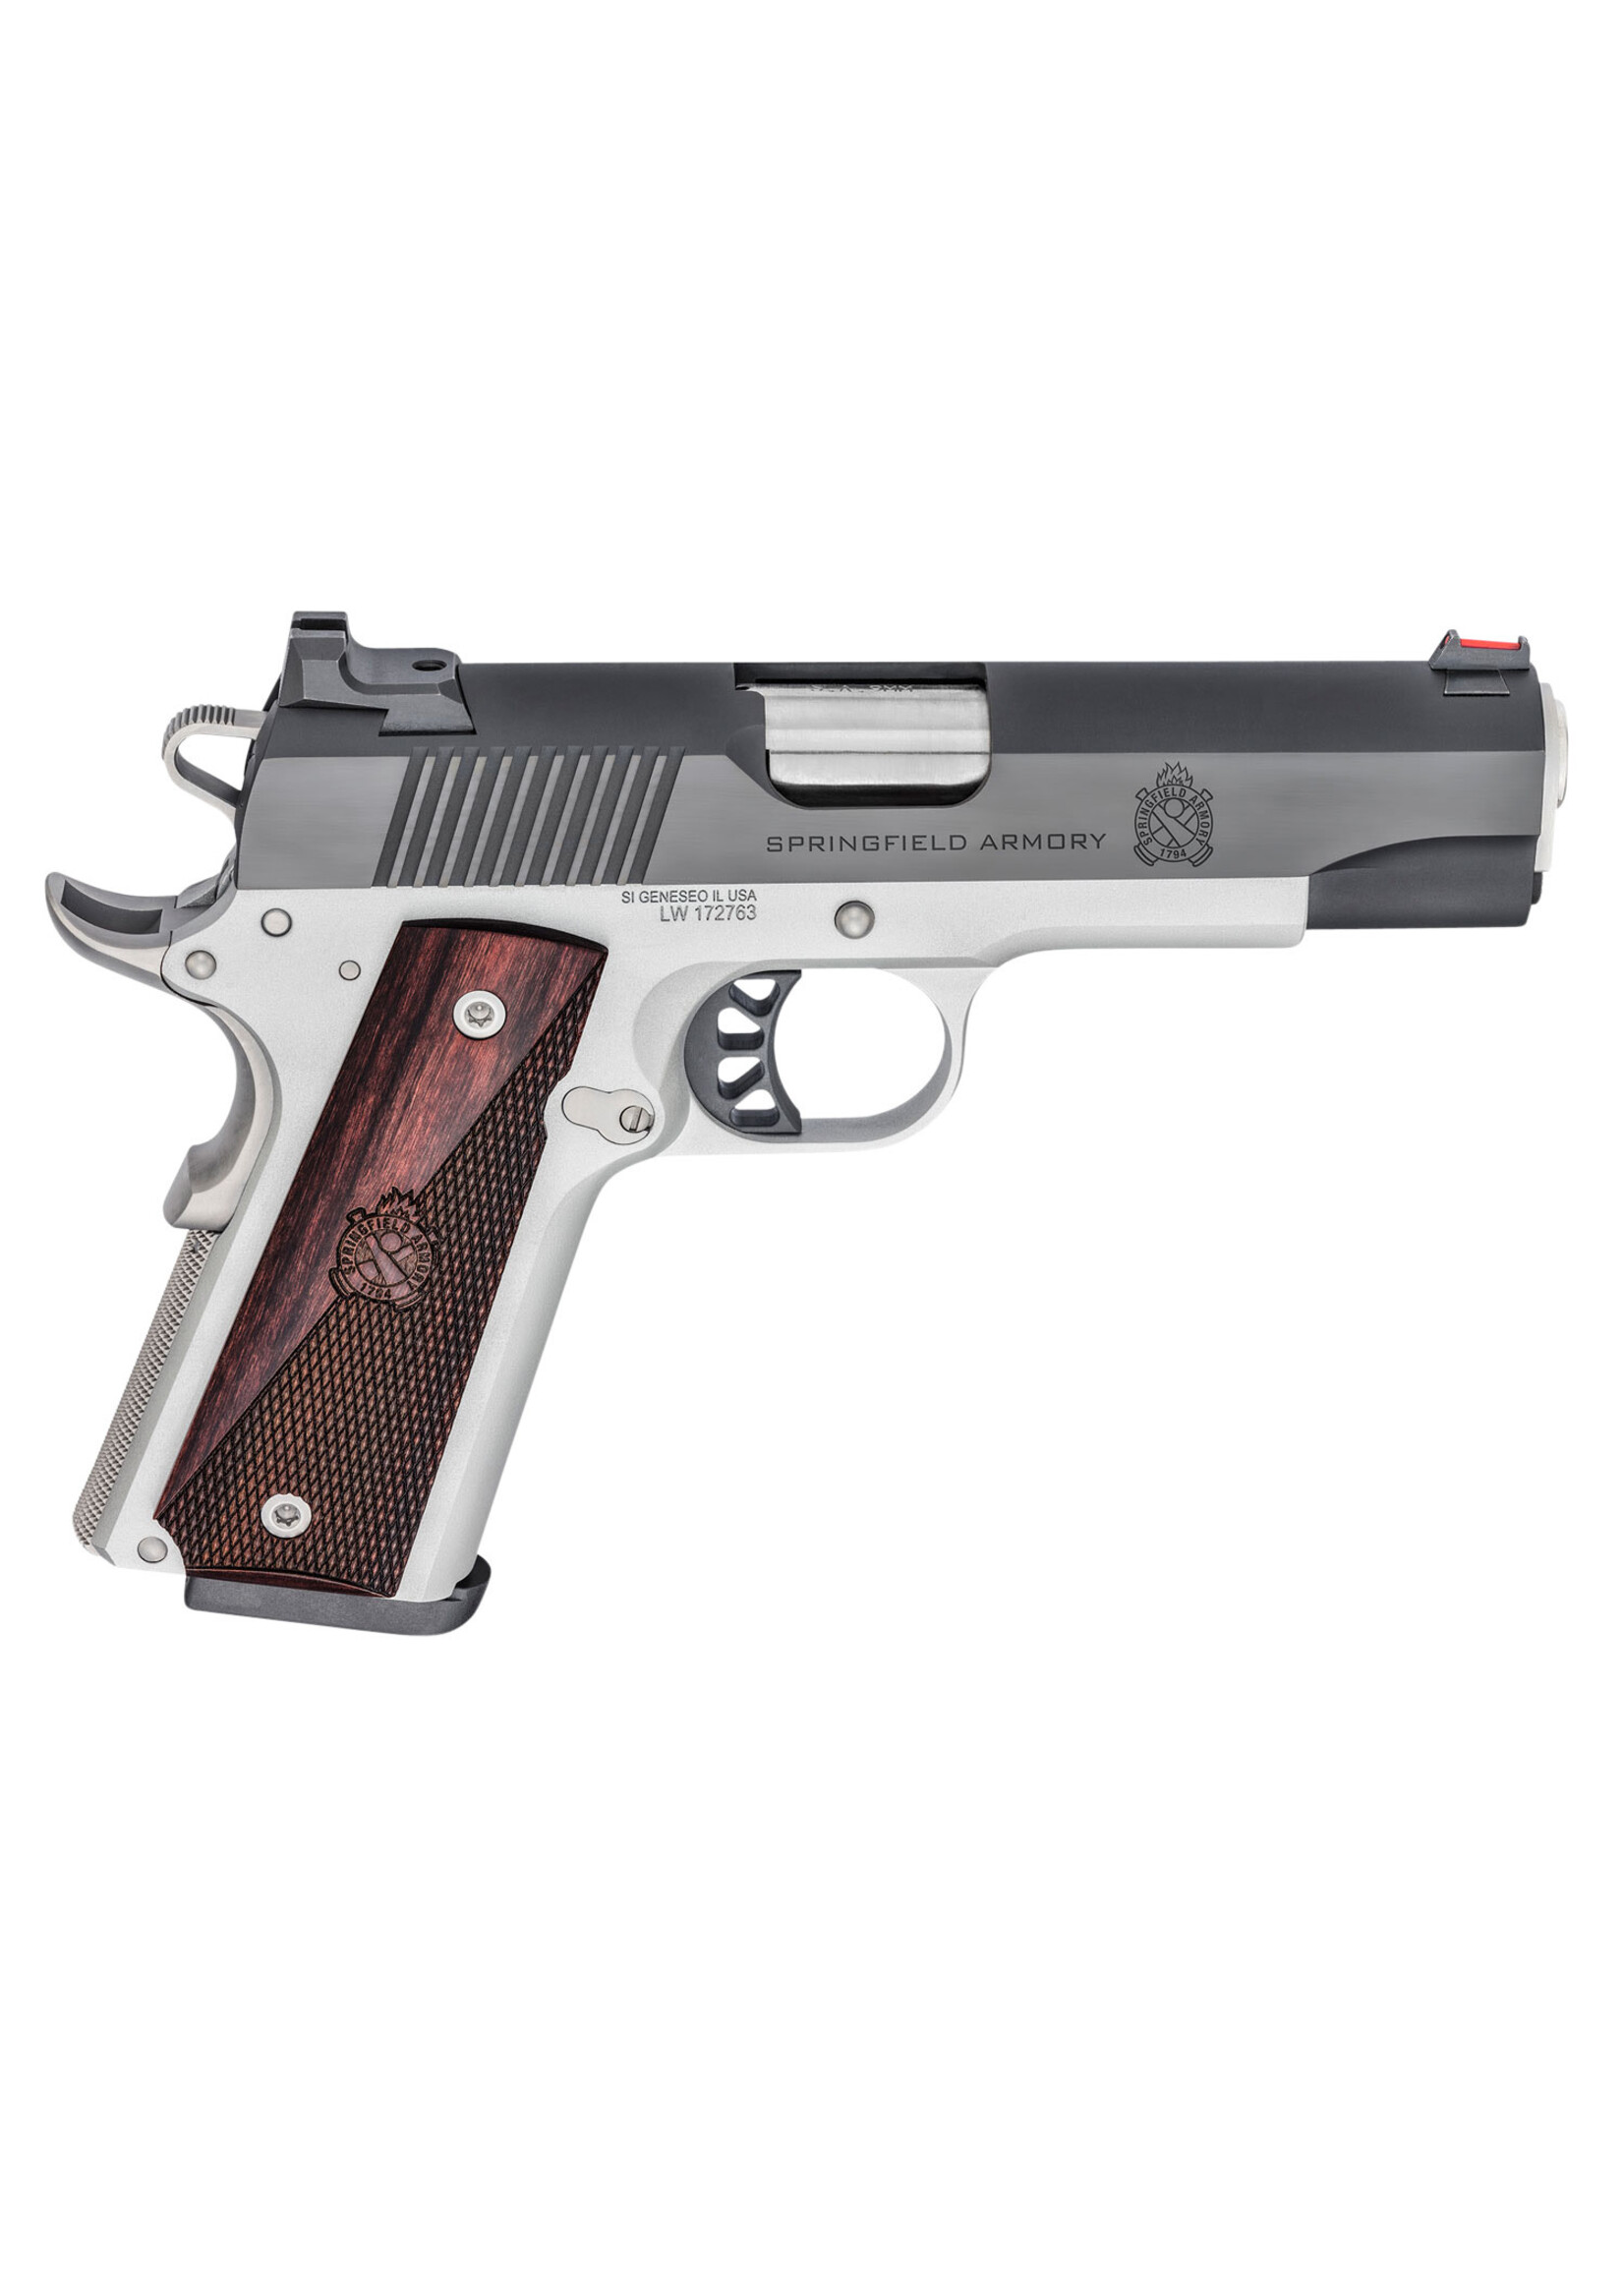 Springfield Armory Springfield Armory PX9117L 1911 Ronin 9mm Luger 9+1 4.25" Stainless Match Grade Steel Barrel, Blued Serrated Carbon Steel Slide, Satin Cerakote Aluminum Frame w/Beavertail, Crossed Cannon Wood Grip, Right Hand